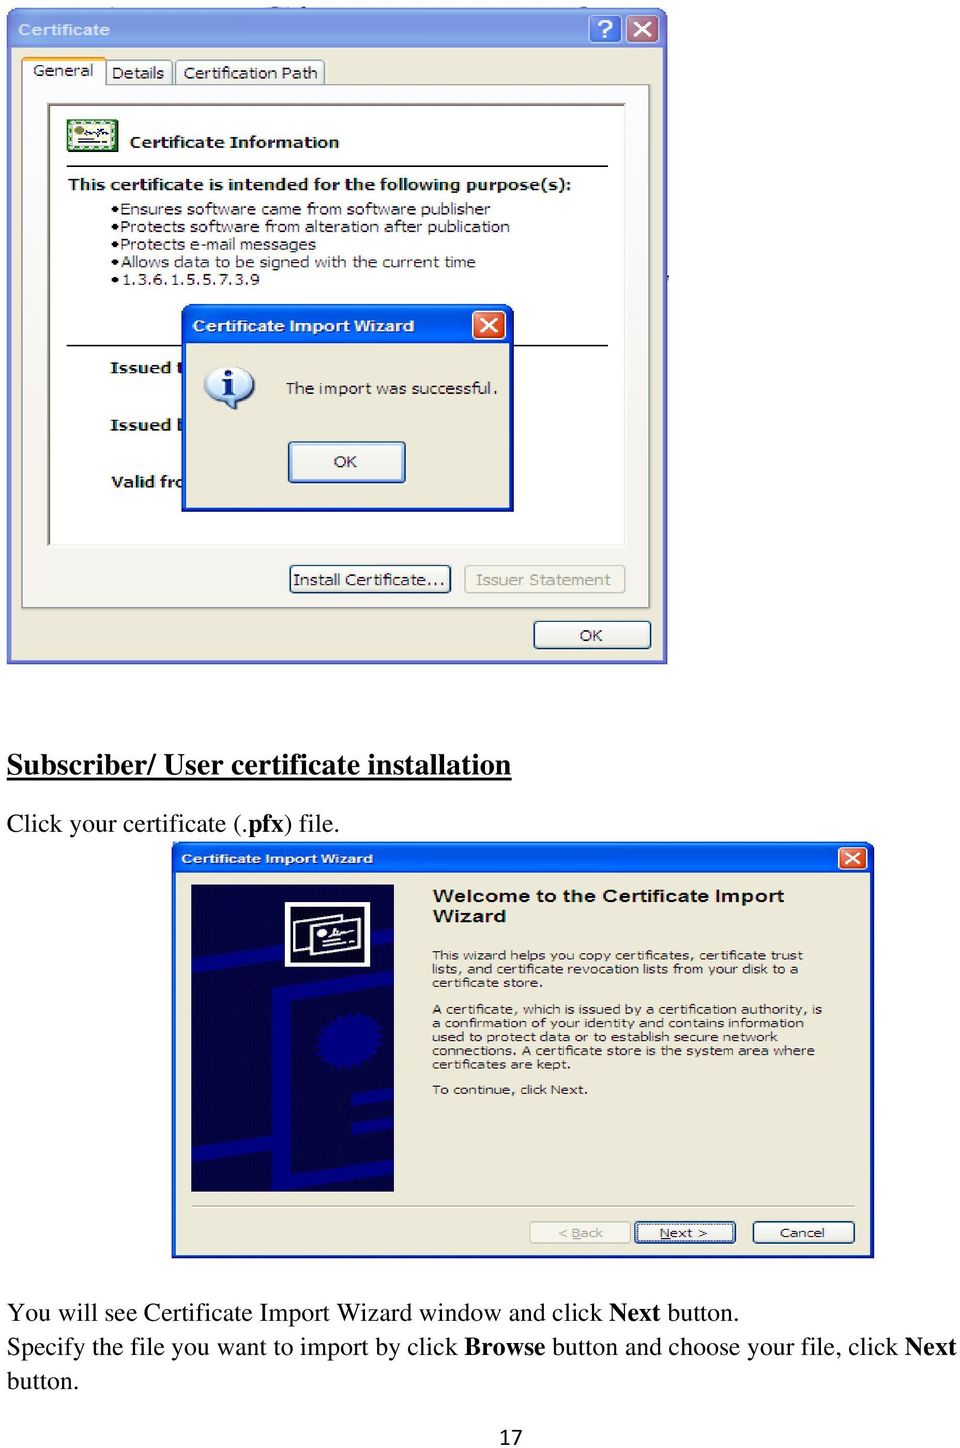 You will see Certificate Import Wizard window and click Next